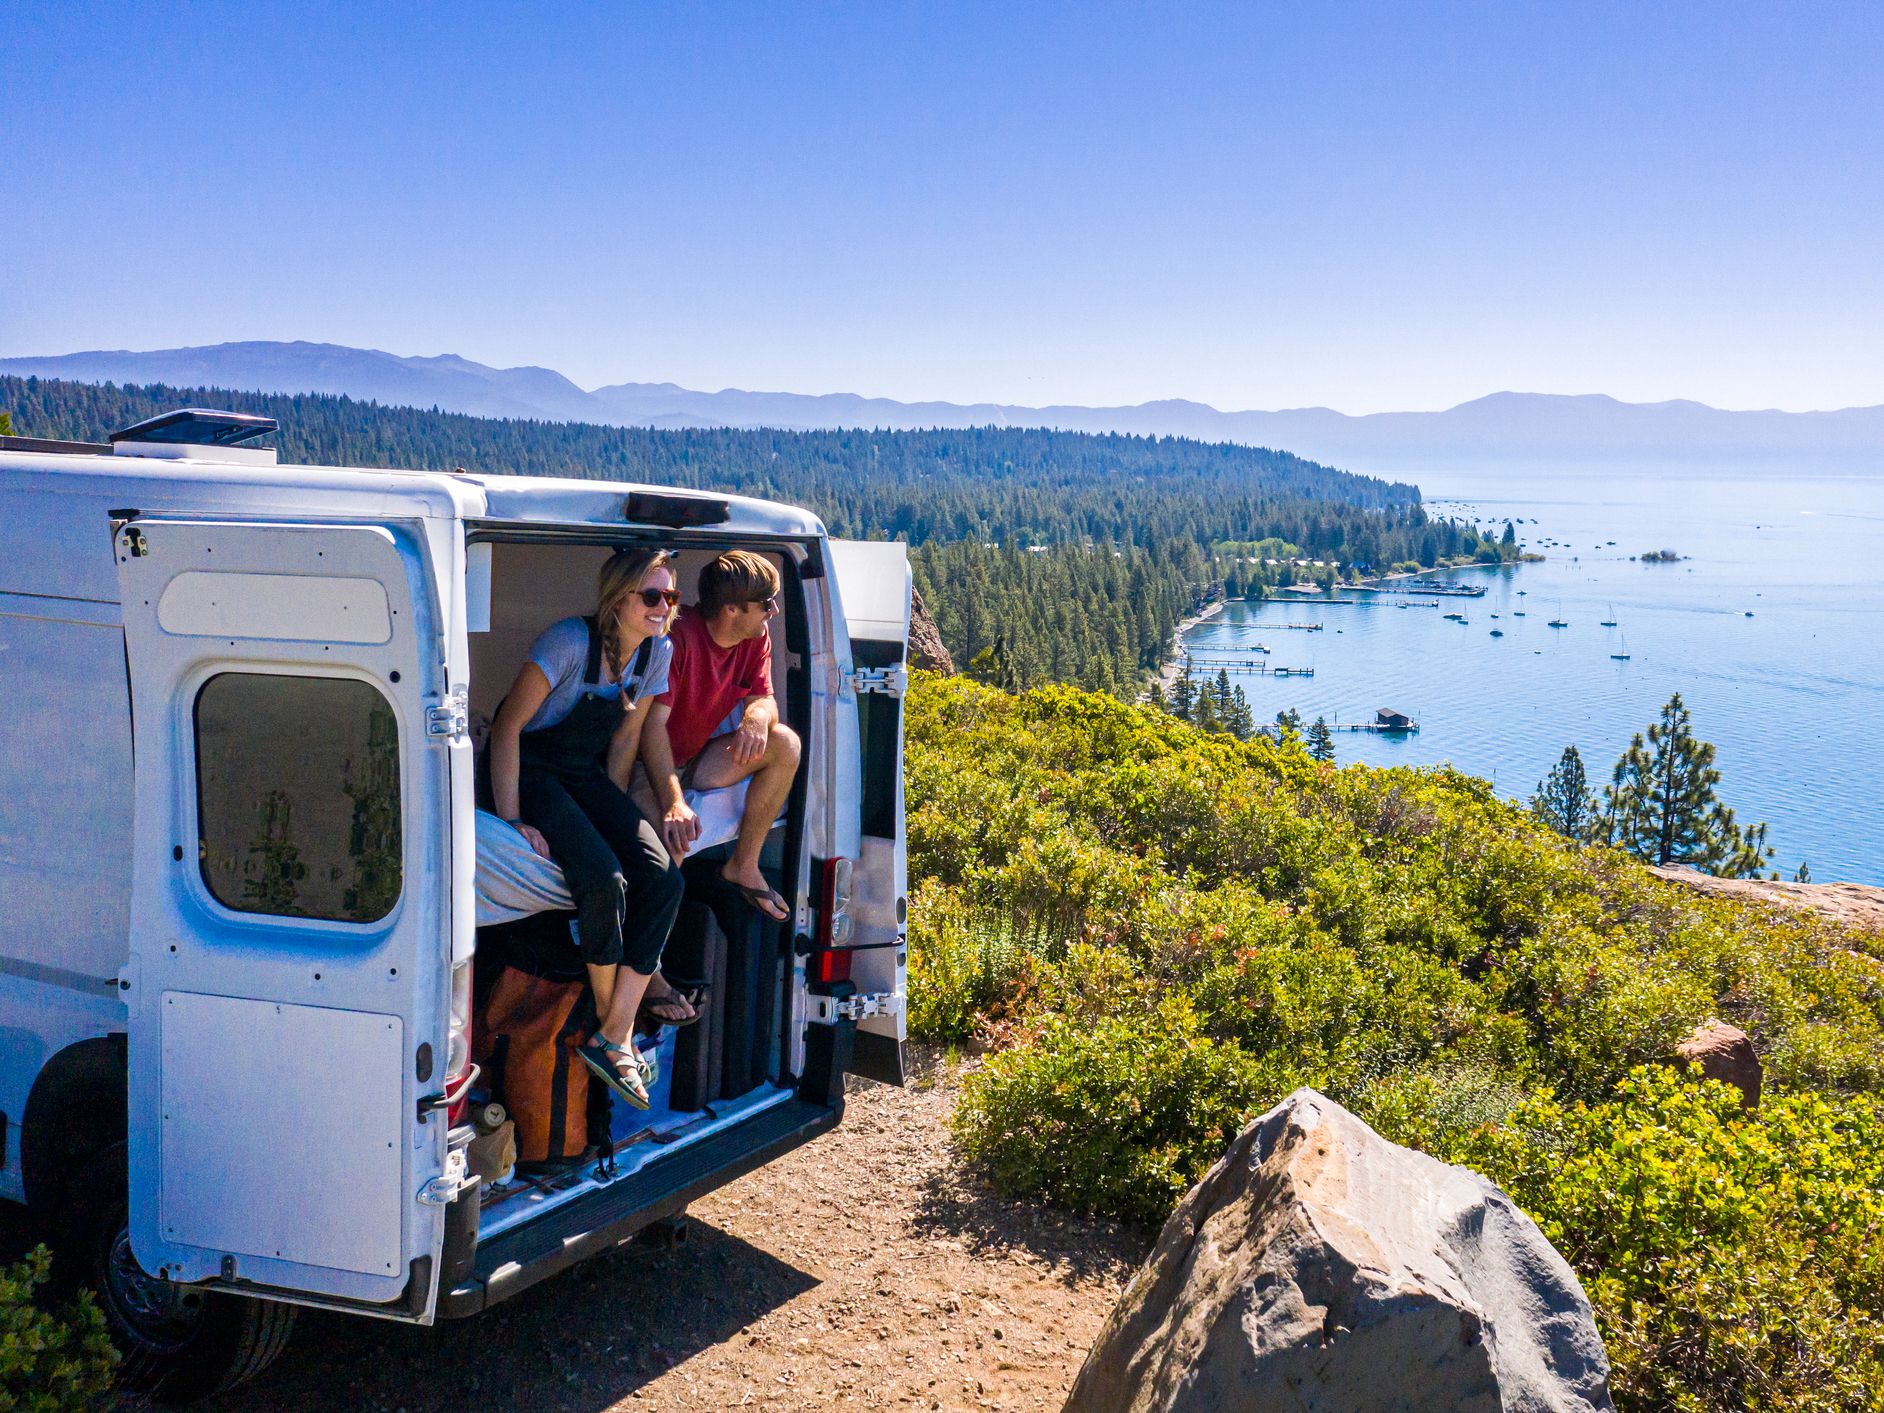 <p>RVs are all-inclusive because the living space is one with the vehicle, but that reality can also be a drawback. “Some people may prefer campers because the space isn’t built around the vehicle,” Lowe says. “Each aspect of it is built to feel homey and isn’t restricted.”</p>